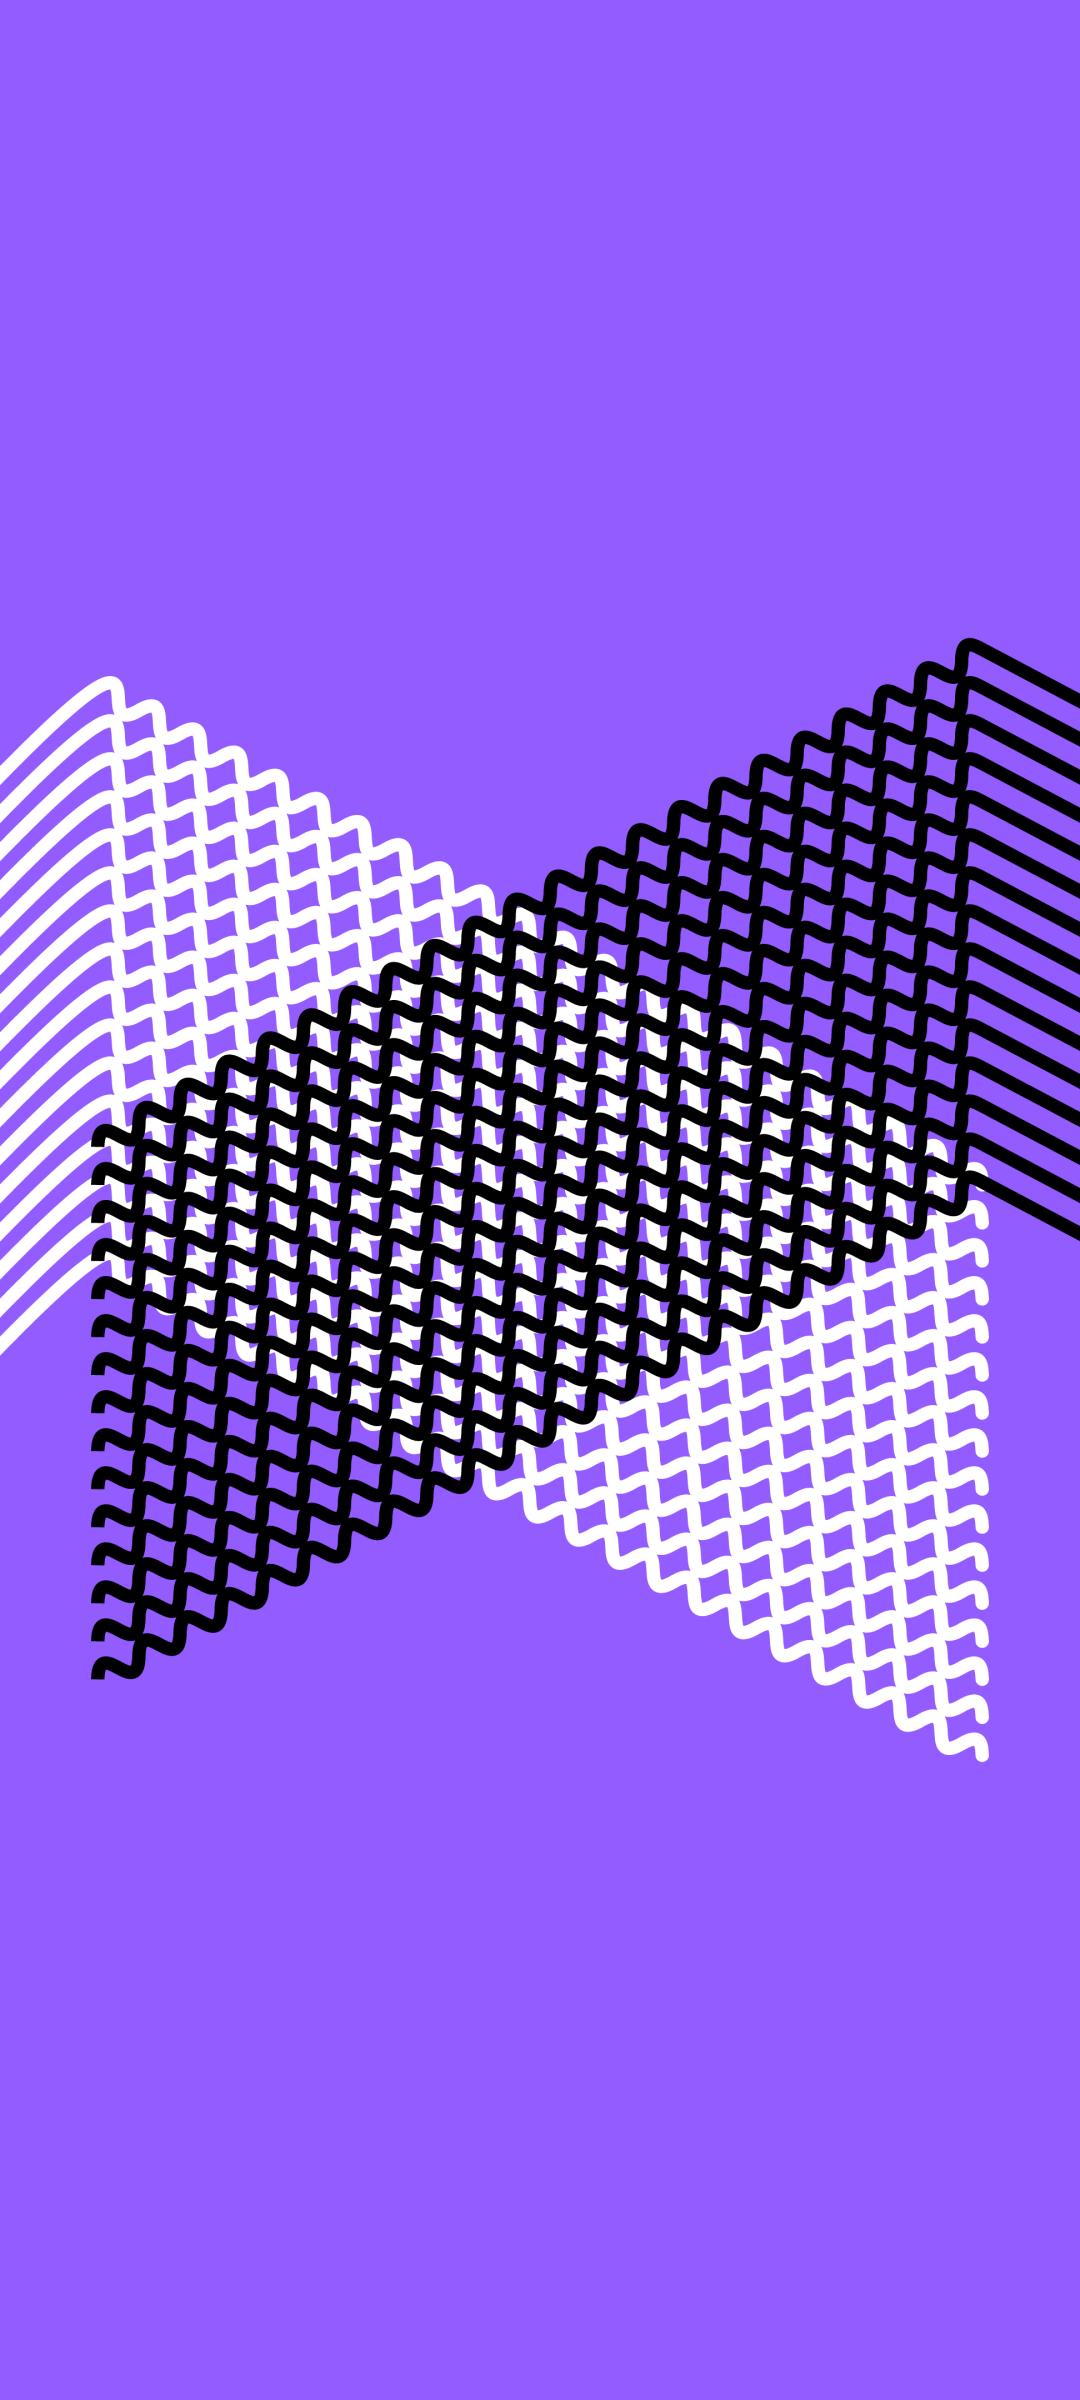 Purple background with black and white zig-zag lines in the foreground - 1080x2400